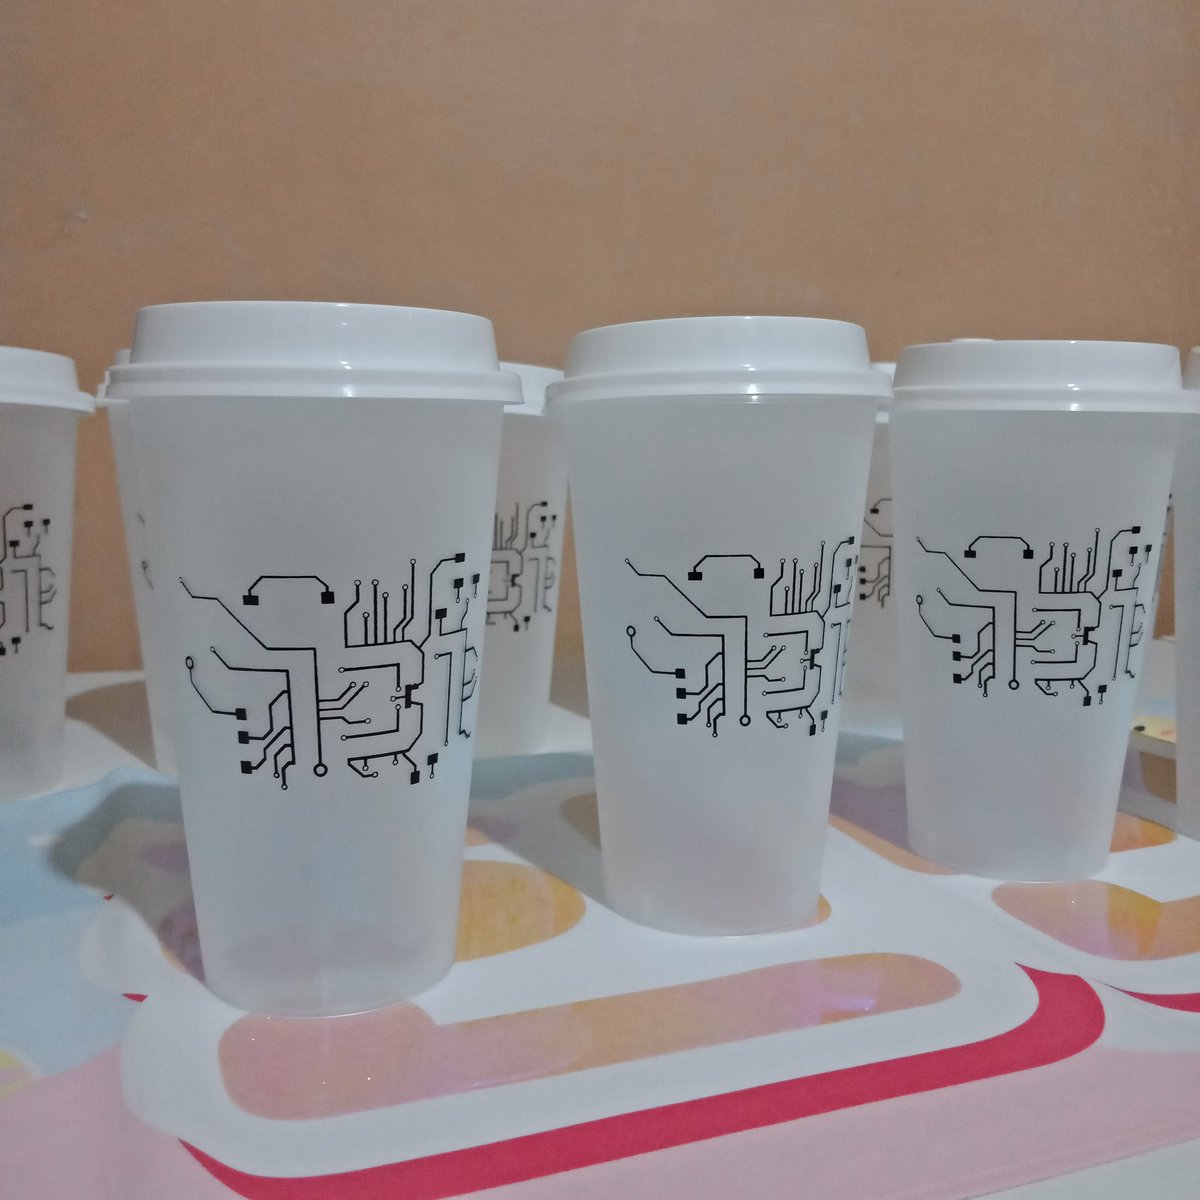 Here's the actual pics of our reusable tumblers. Order now:  http://bit.ly/LVEB_OnlineCSE INTERNATIONAL GO ㅡ OPENWe are now opening an int'l GO as we have extra tumblers. If you're interested, please send us a message. #HANBIN  #BI  #김한빈  #비아이  #LaVieEstBelle_OnlineCSE